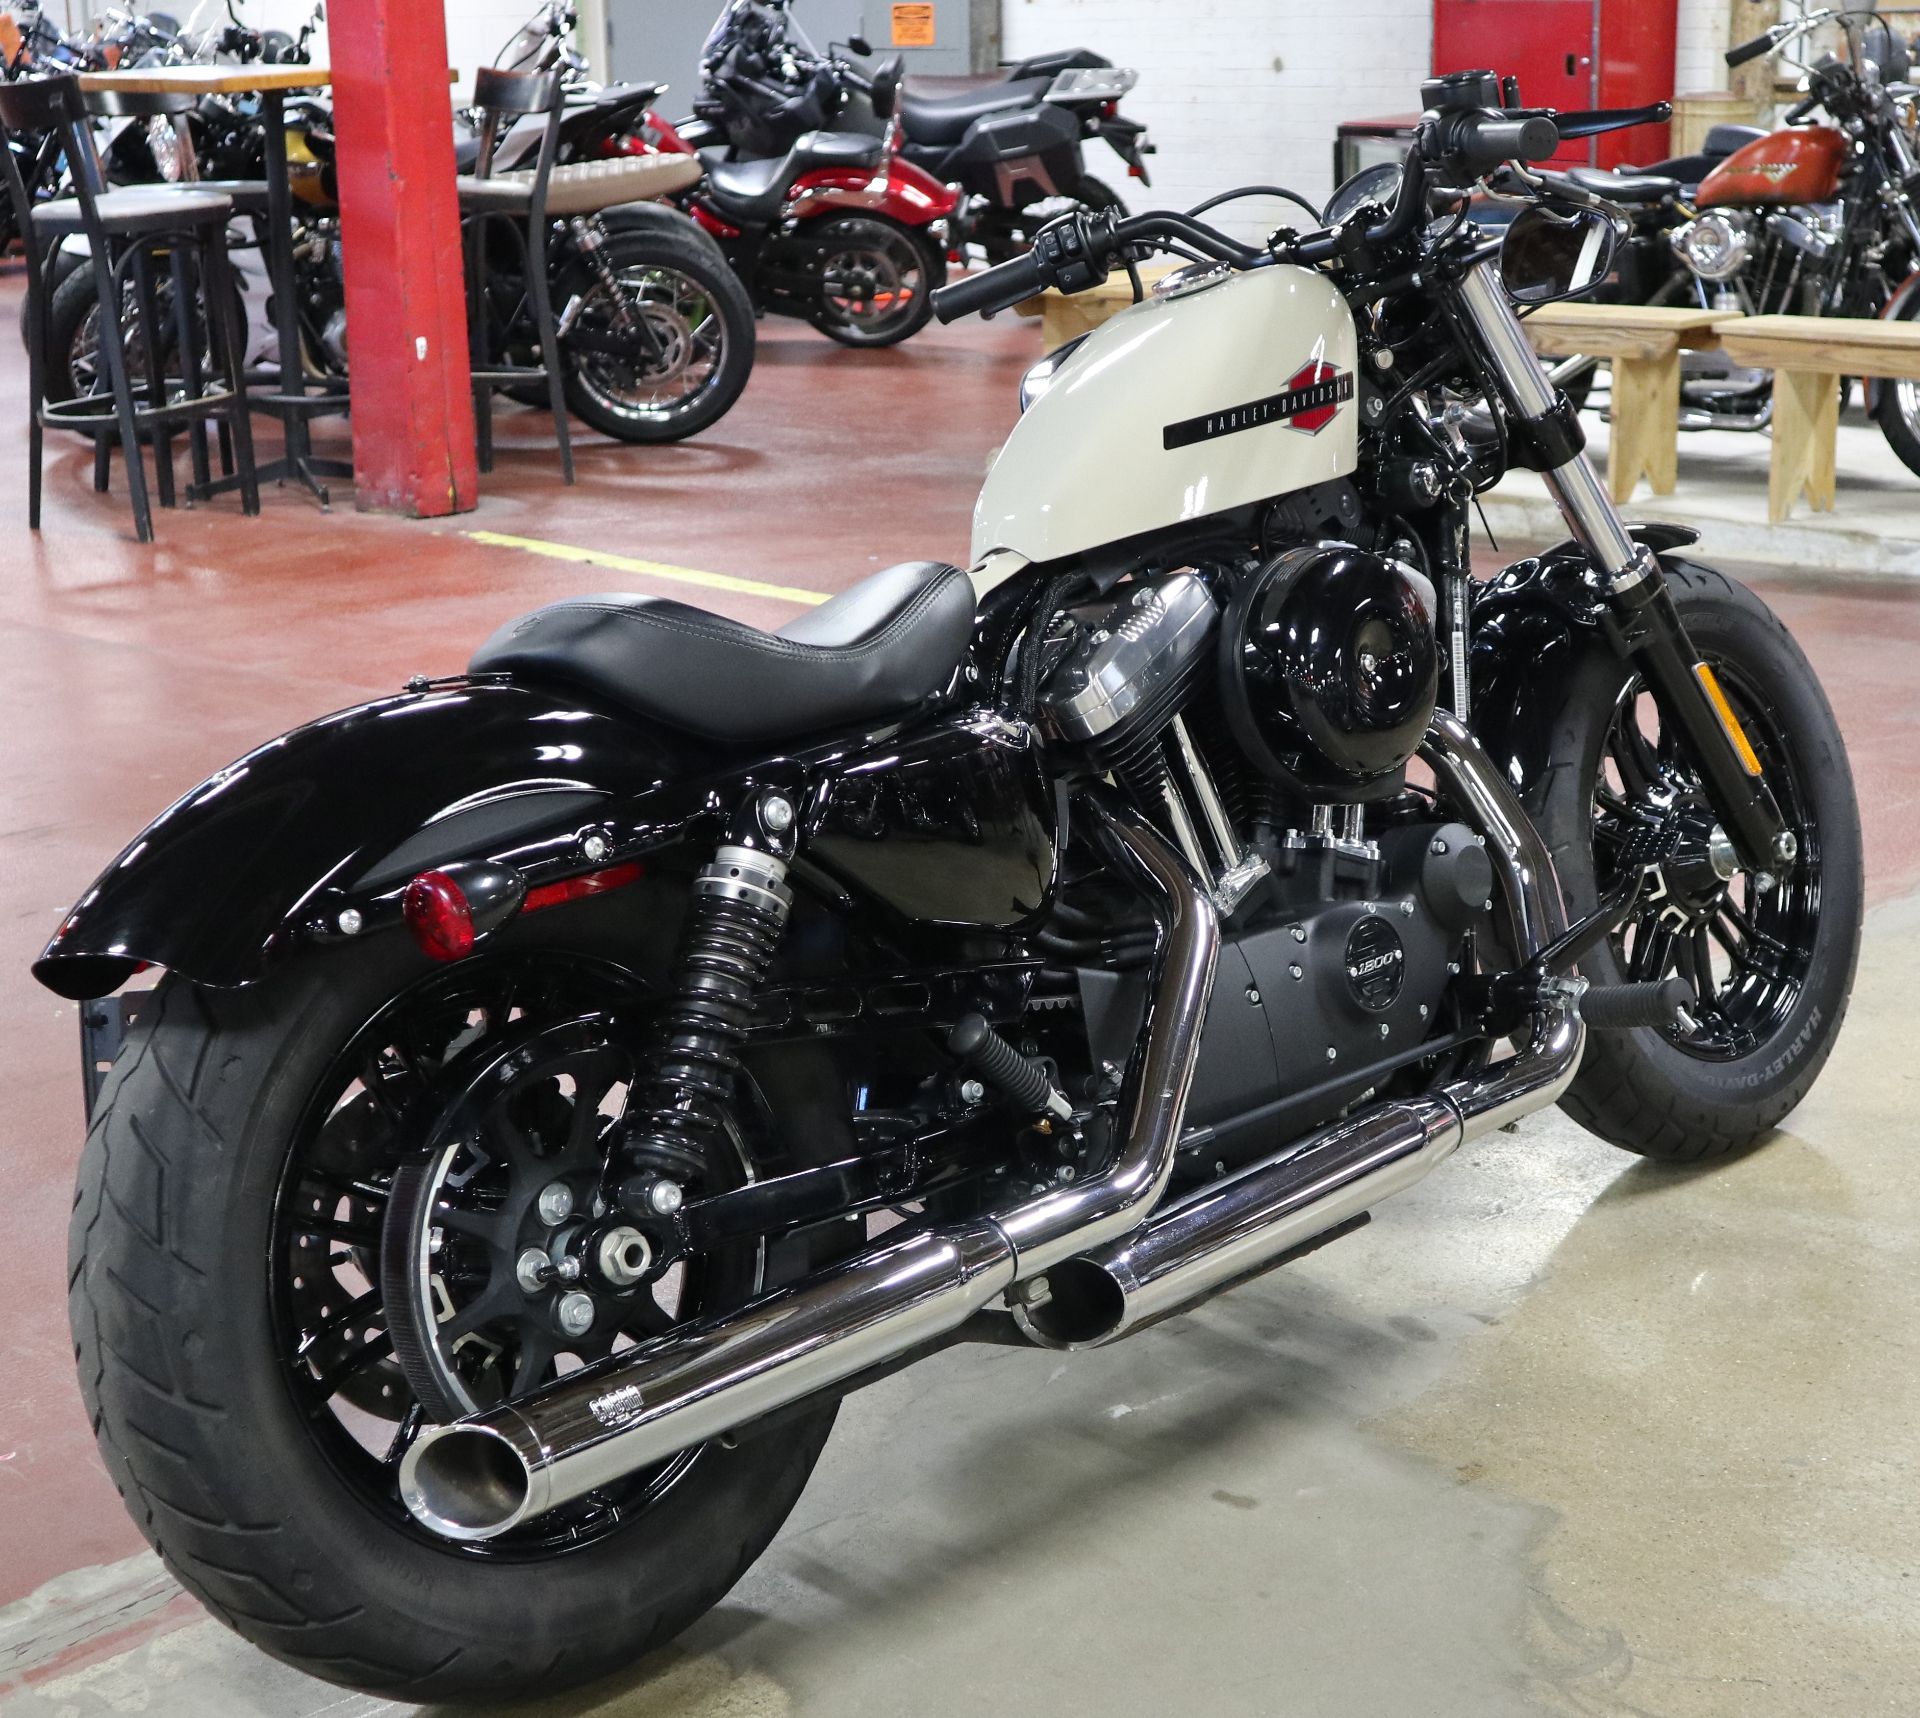 2022 Harley-Davidson Forty-Eight® in New London, Connecticut - Photo 8